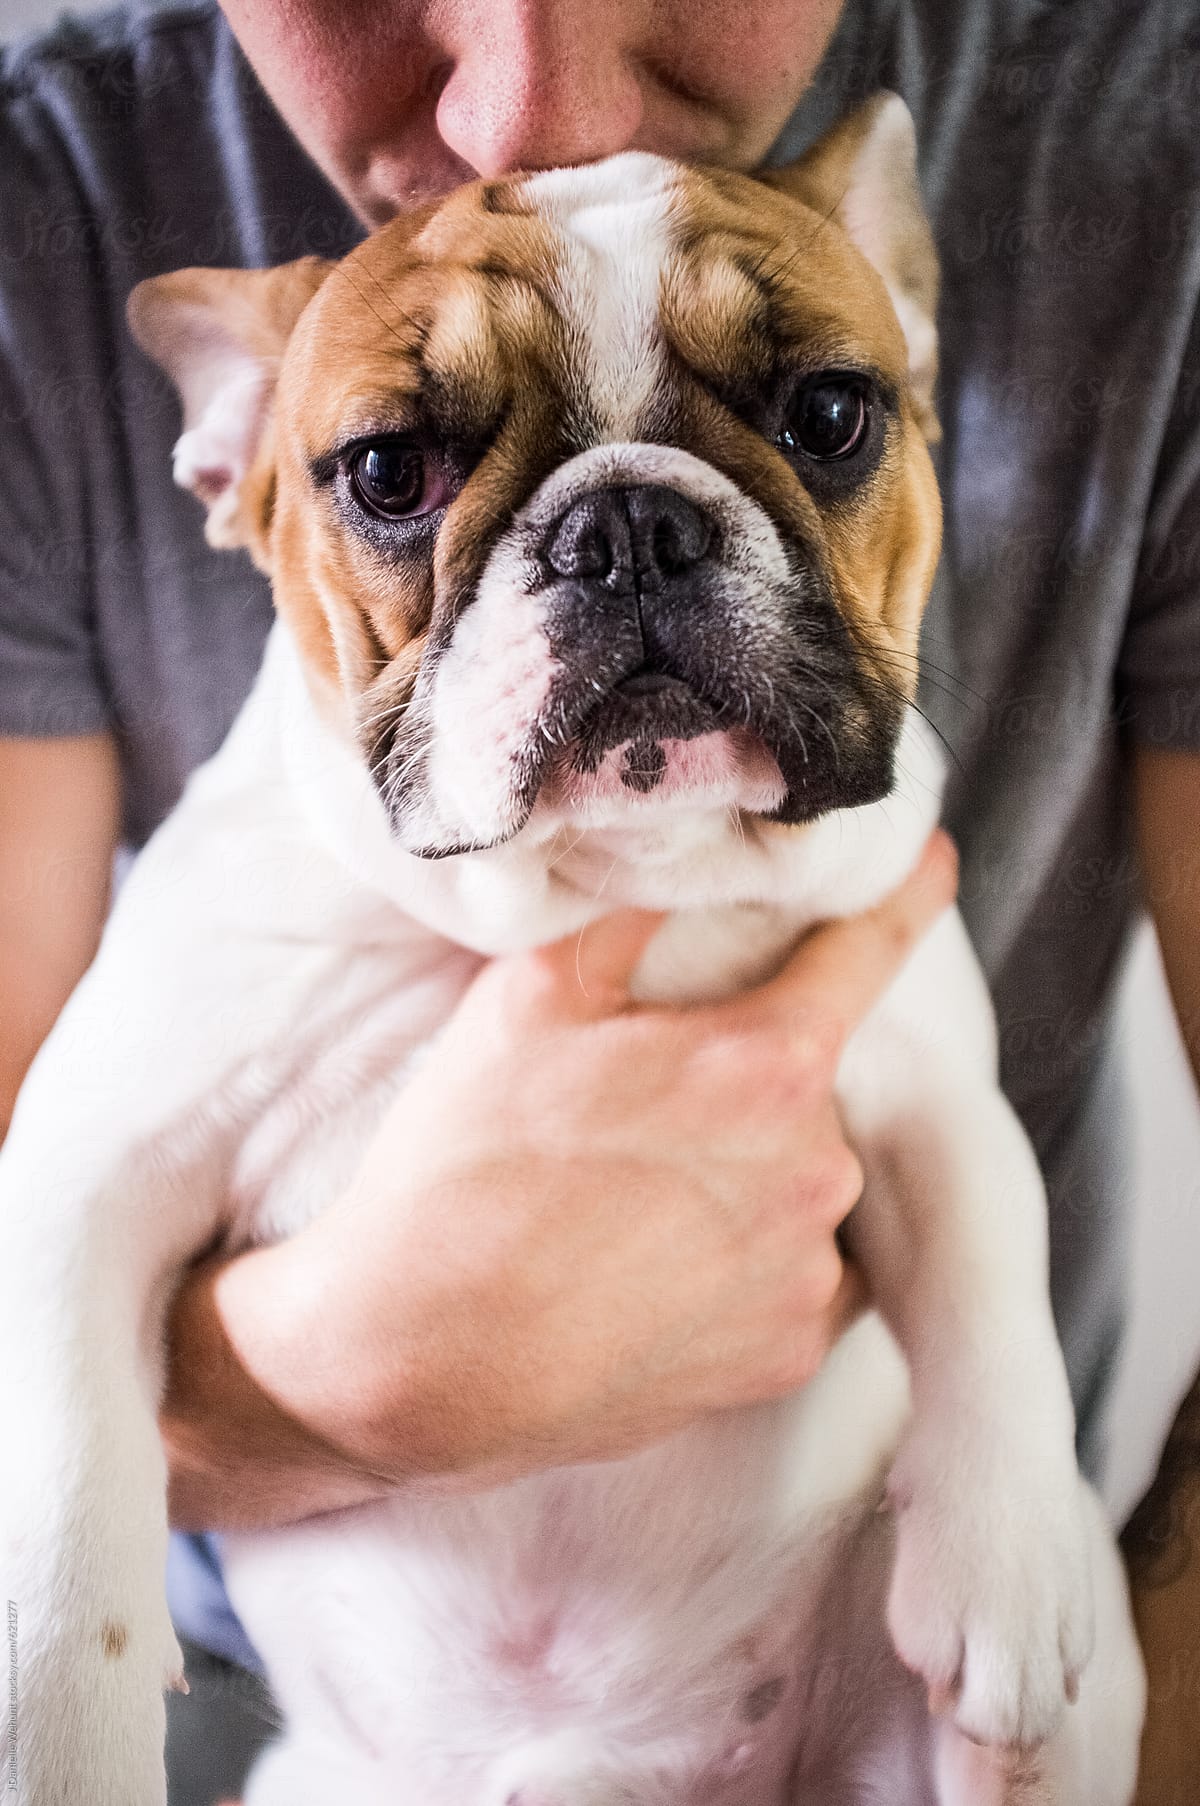 A French Bulldog puppy looking at the camera being held by a man